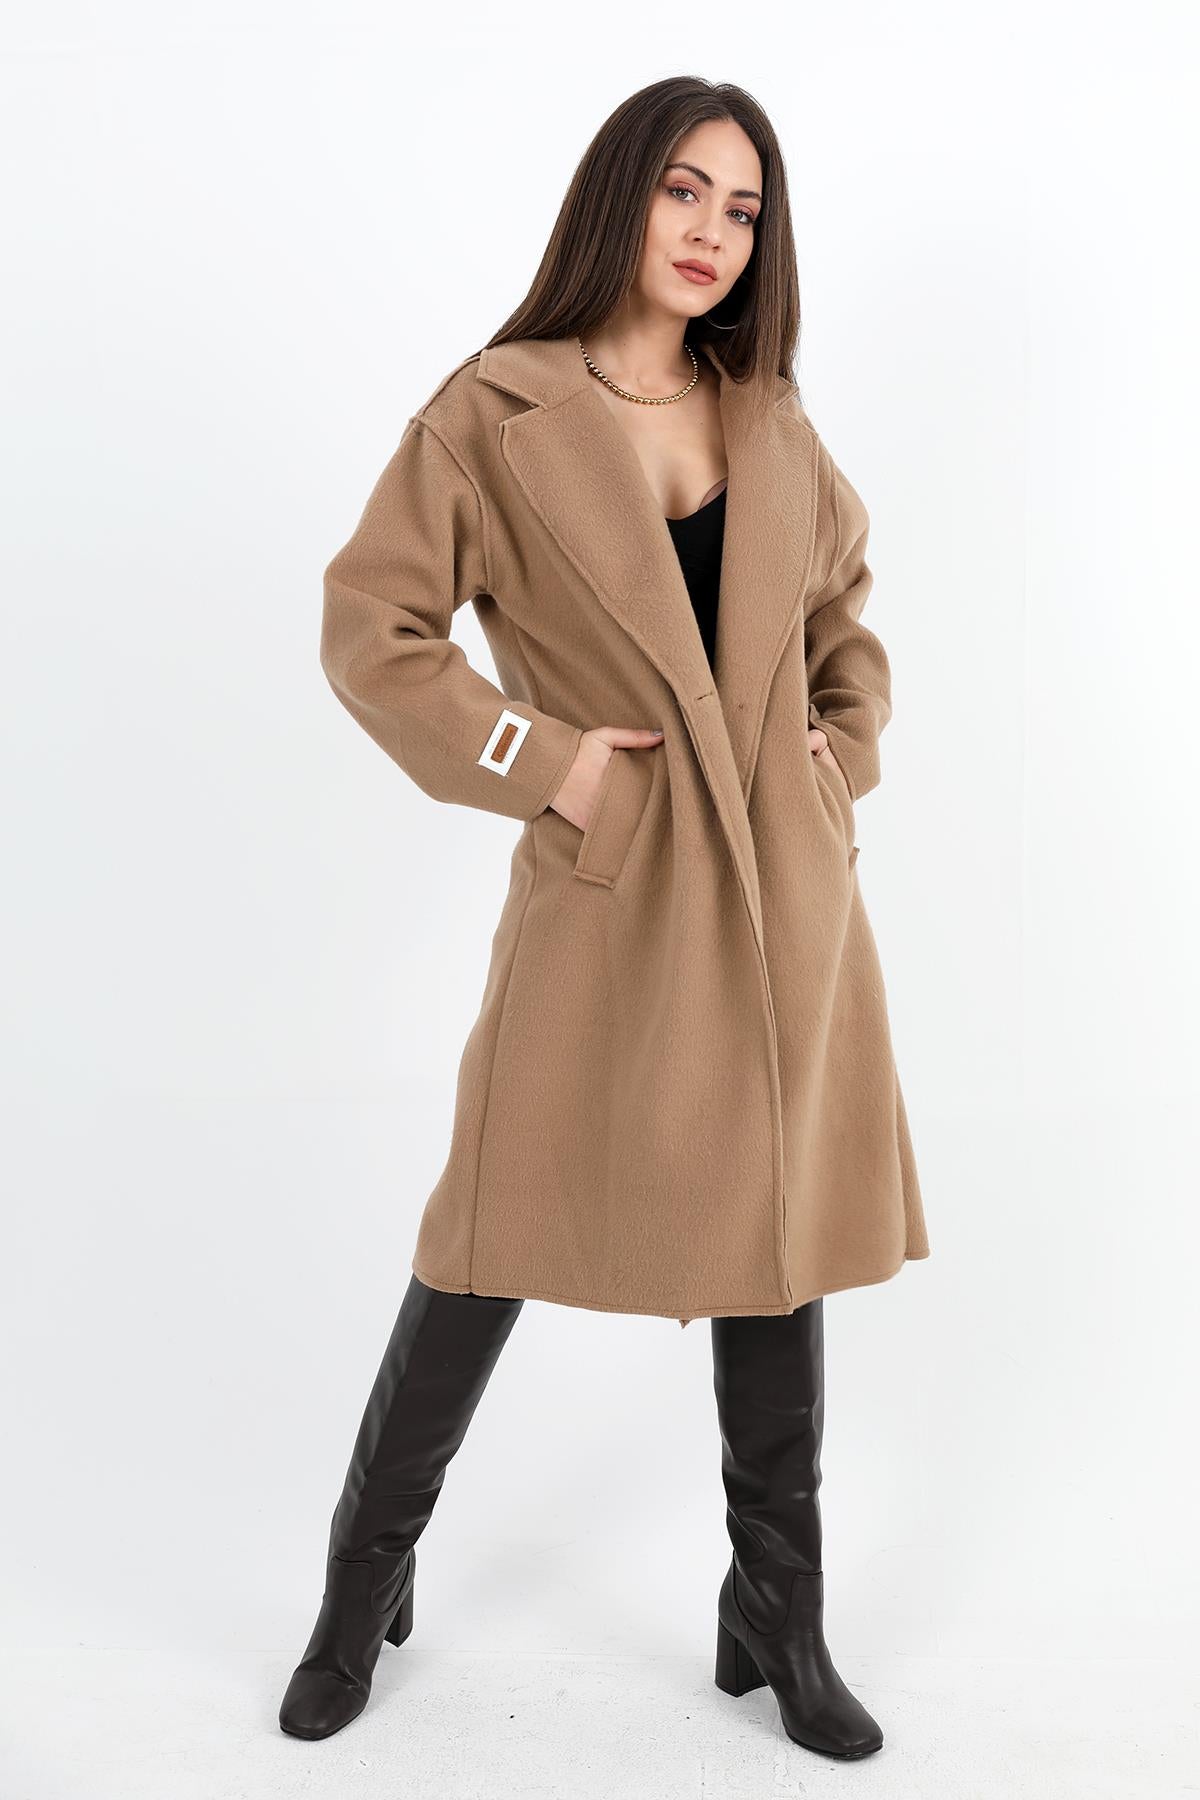 Women's Cashmere Coat Double Breasted Collar Sleeve with Emblem Detail - Camel - STREETMODE™